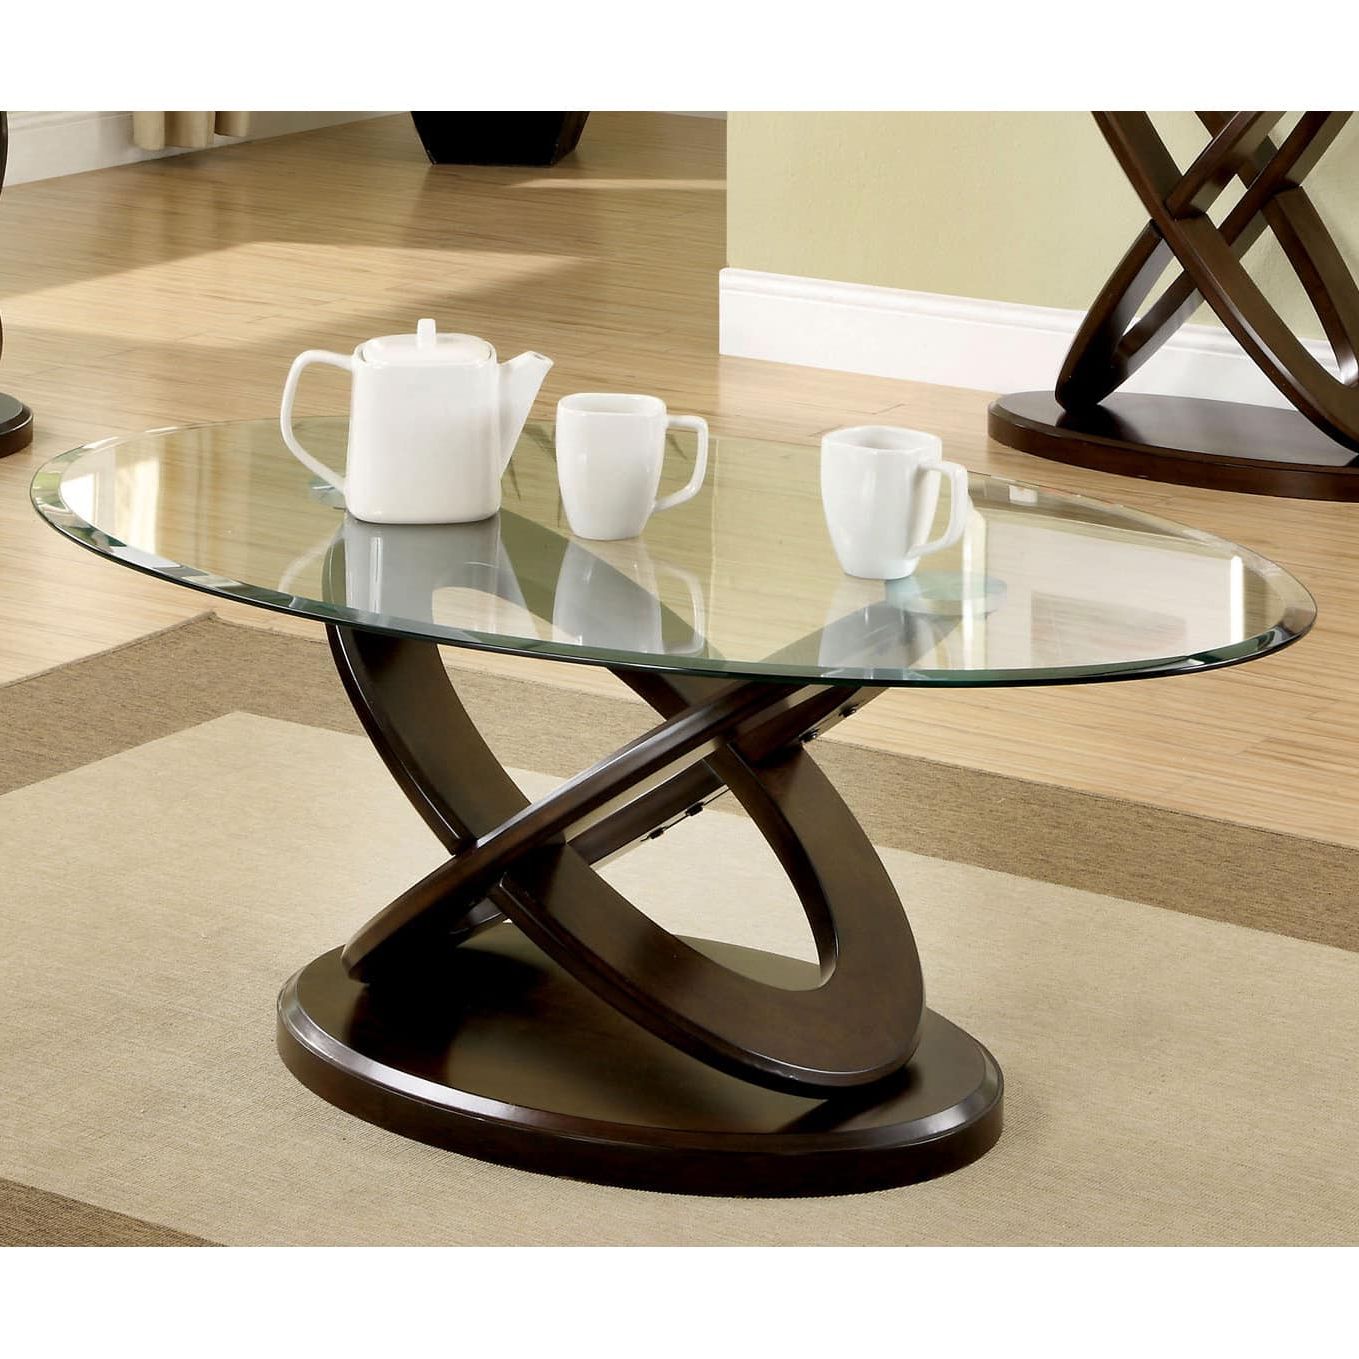 2019 Oval Glass Top Coffee Table – Tarkhan (View 12 of 15)